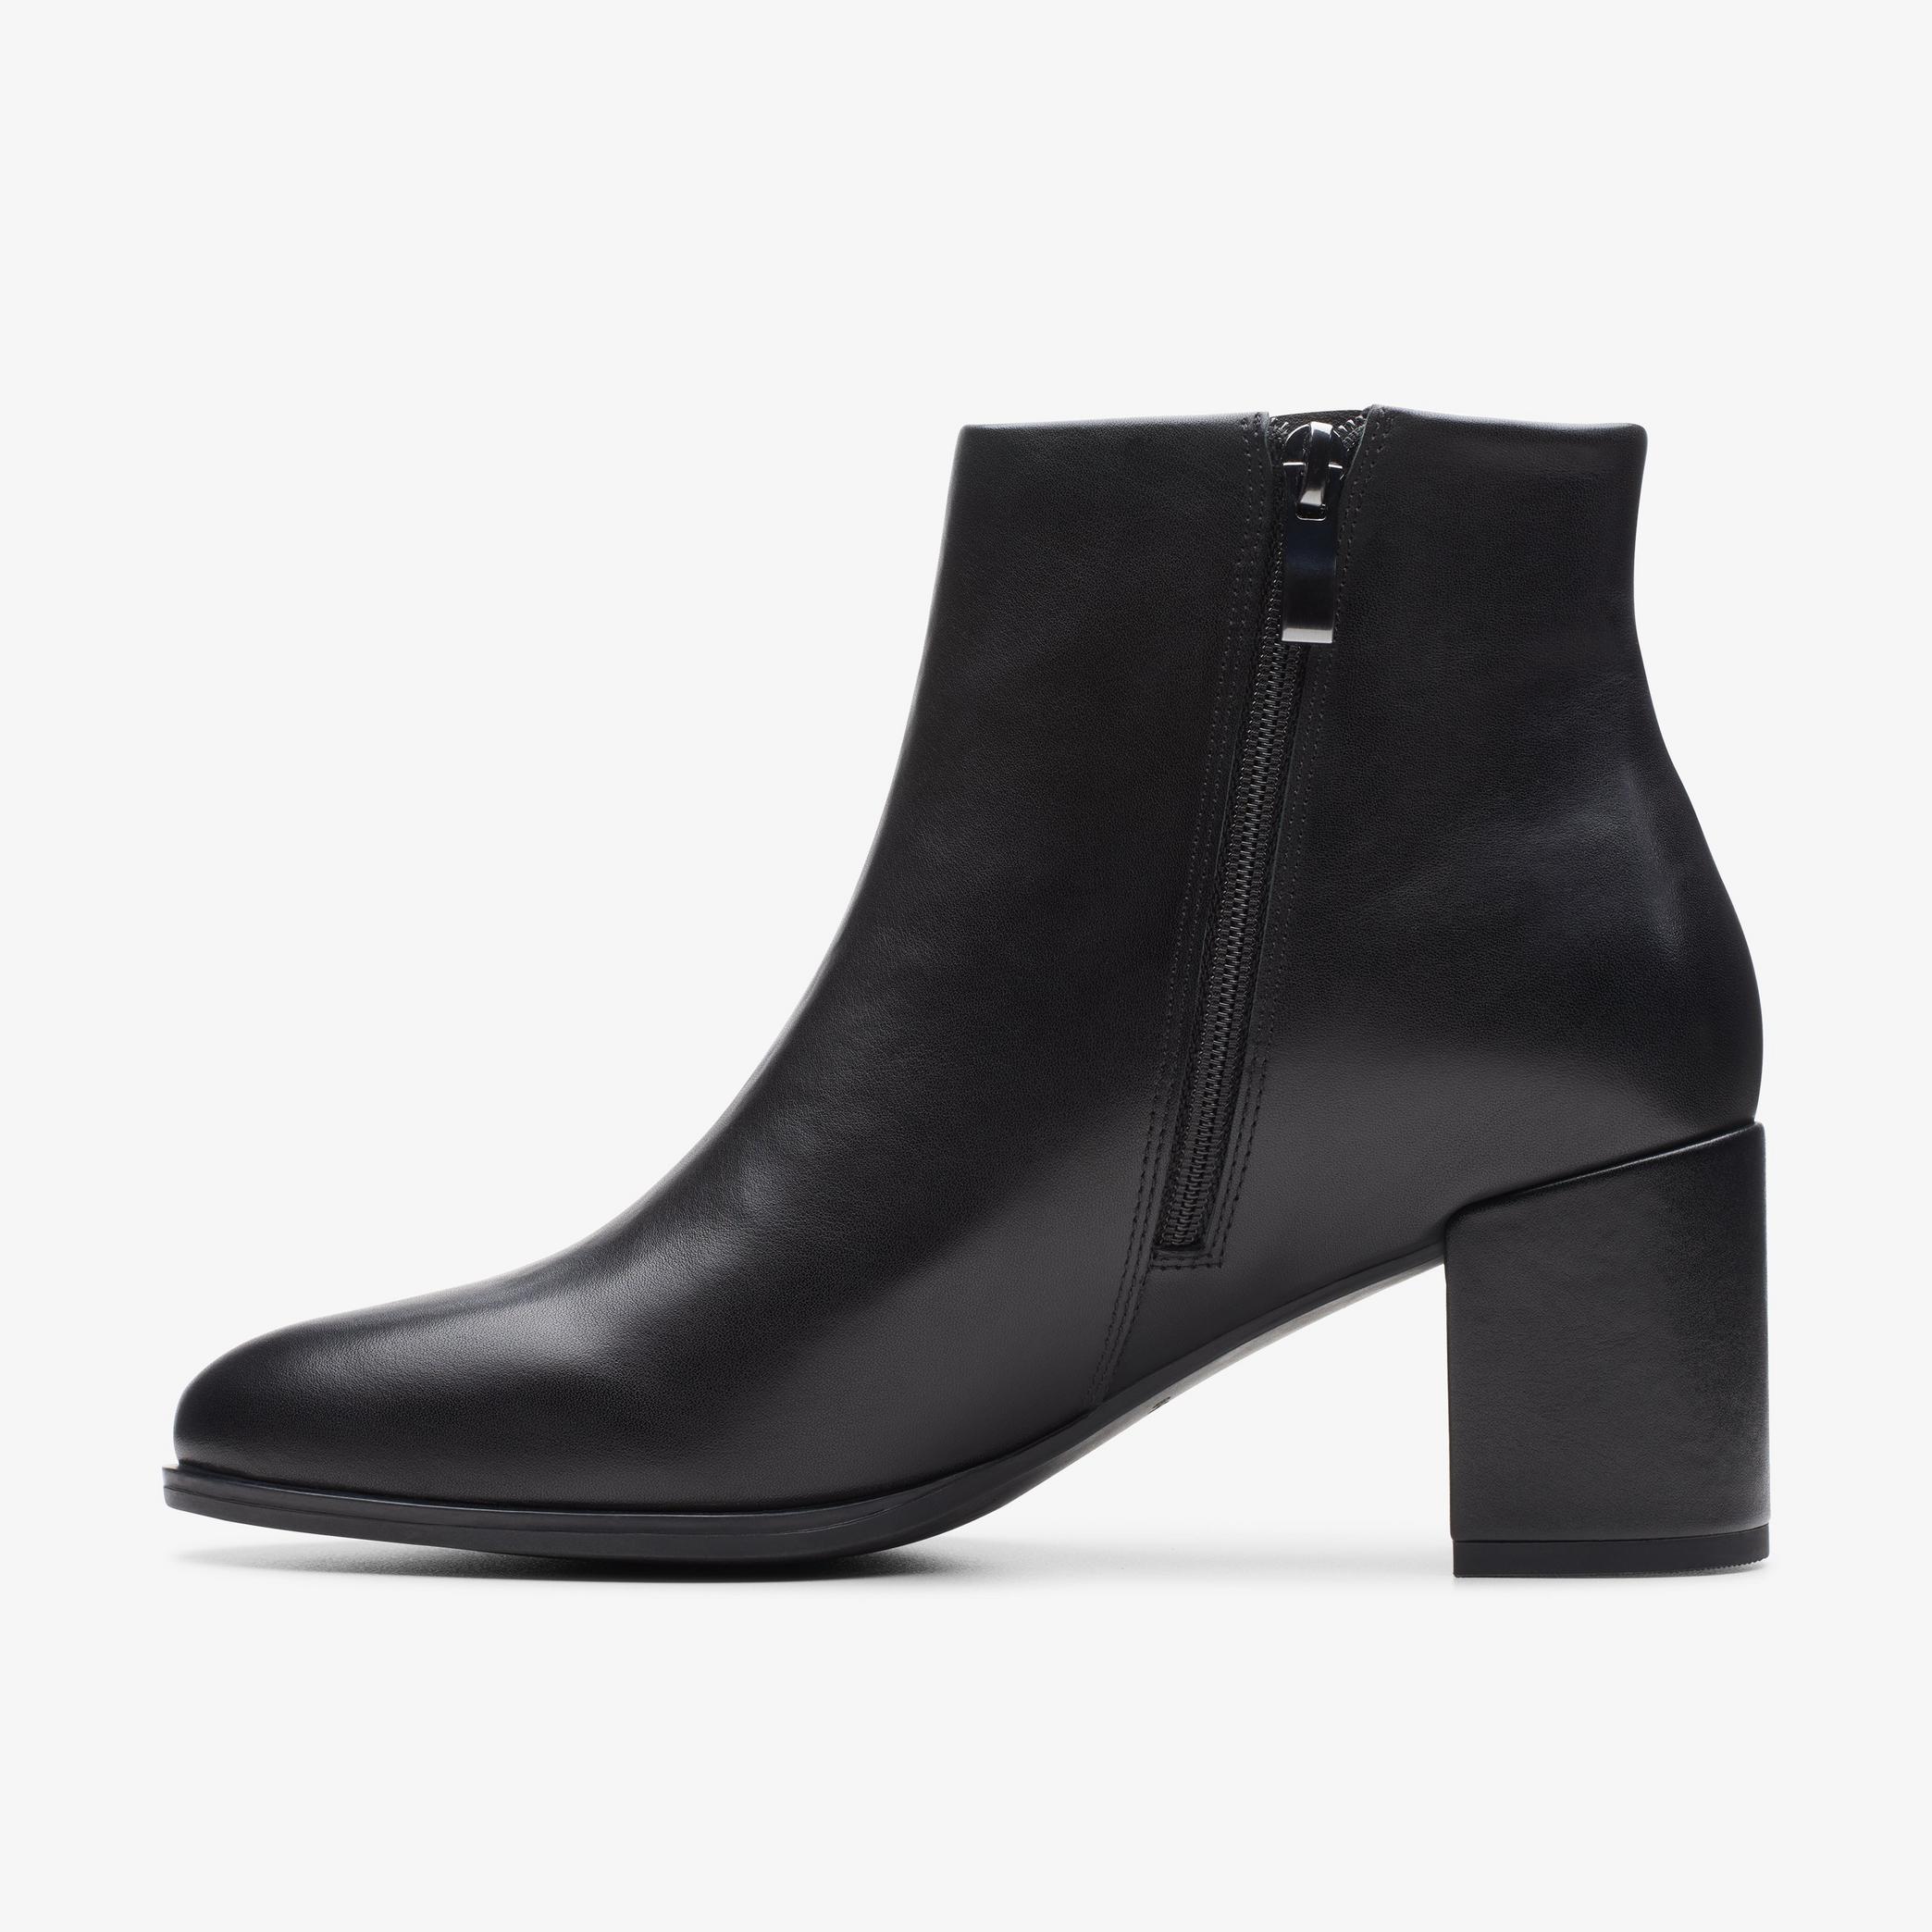 Freva 55 Zip Black Leather Ankle Boots, view 3 of 7